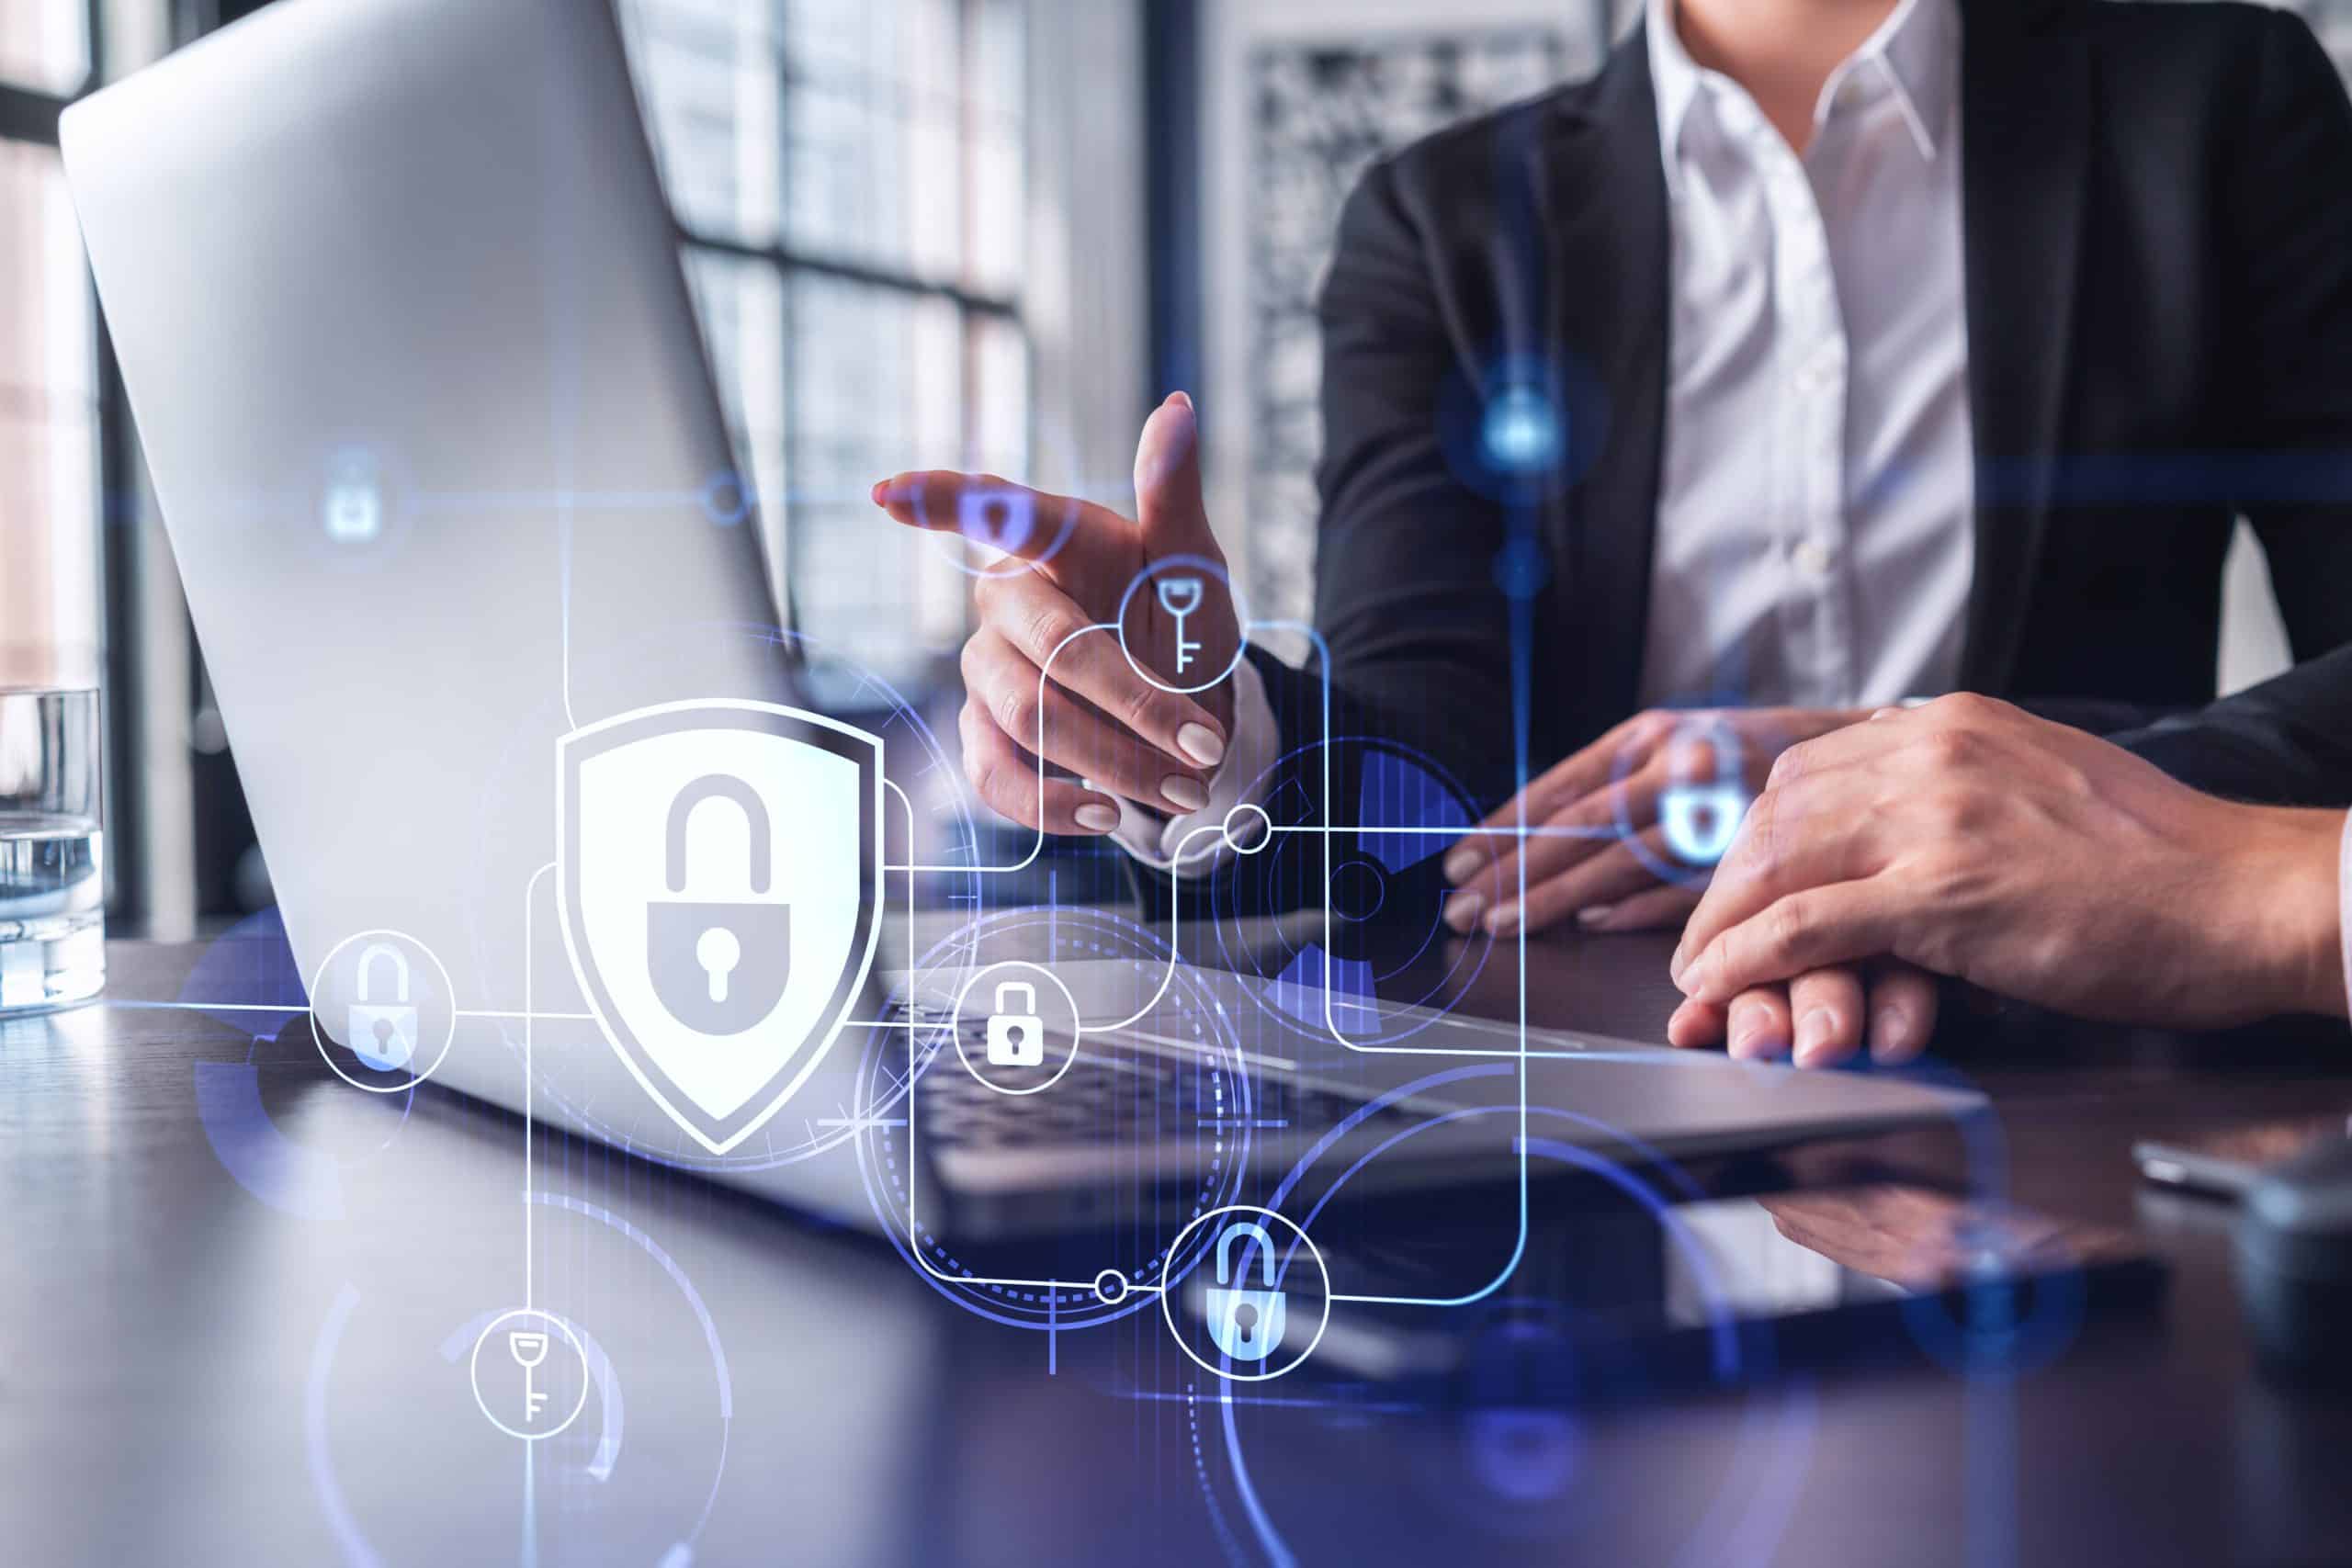 Top Nine Cybersecurity Tips to Help Your Small Business Keep Data Safe